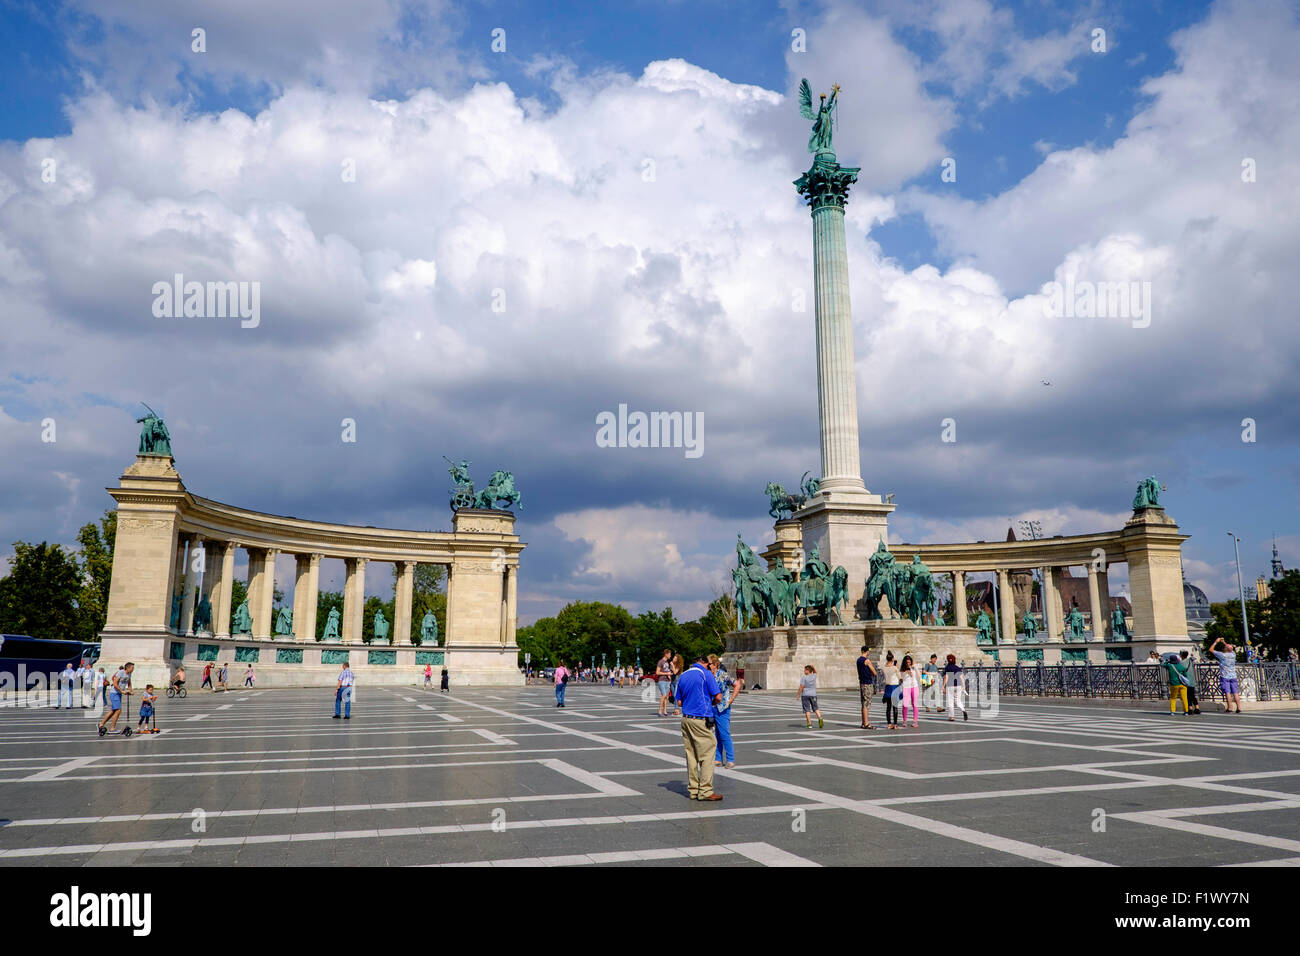 Millennium Monument, Heroes Square, Budapest, Hungary Europe. Statues of Magyar chieftains around base of column Stock Photo